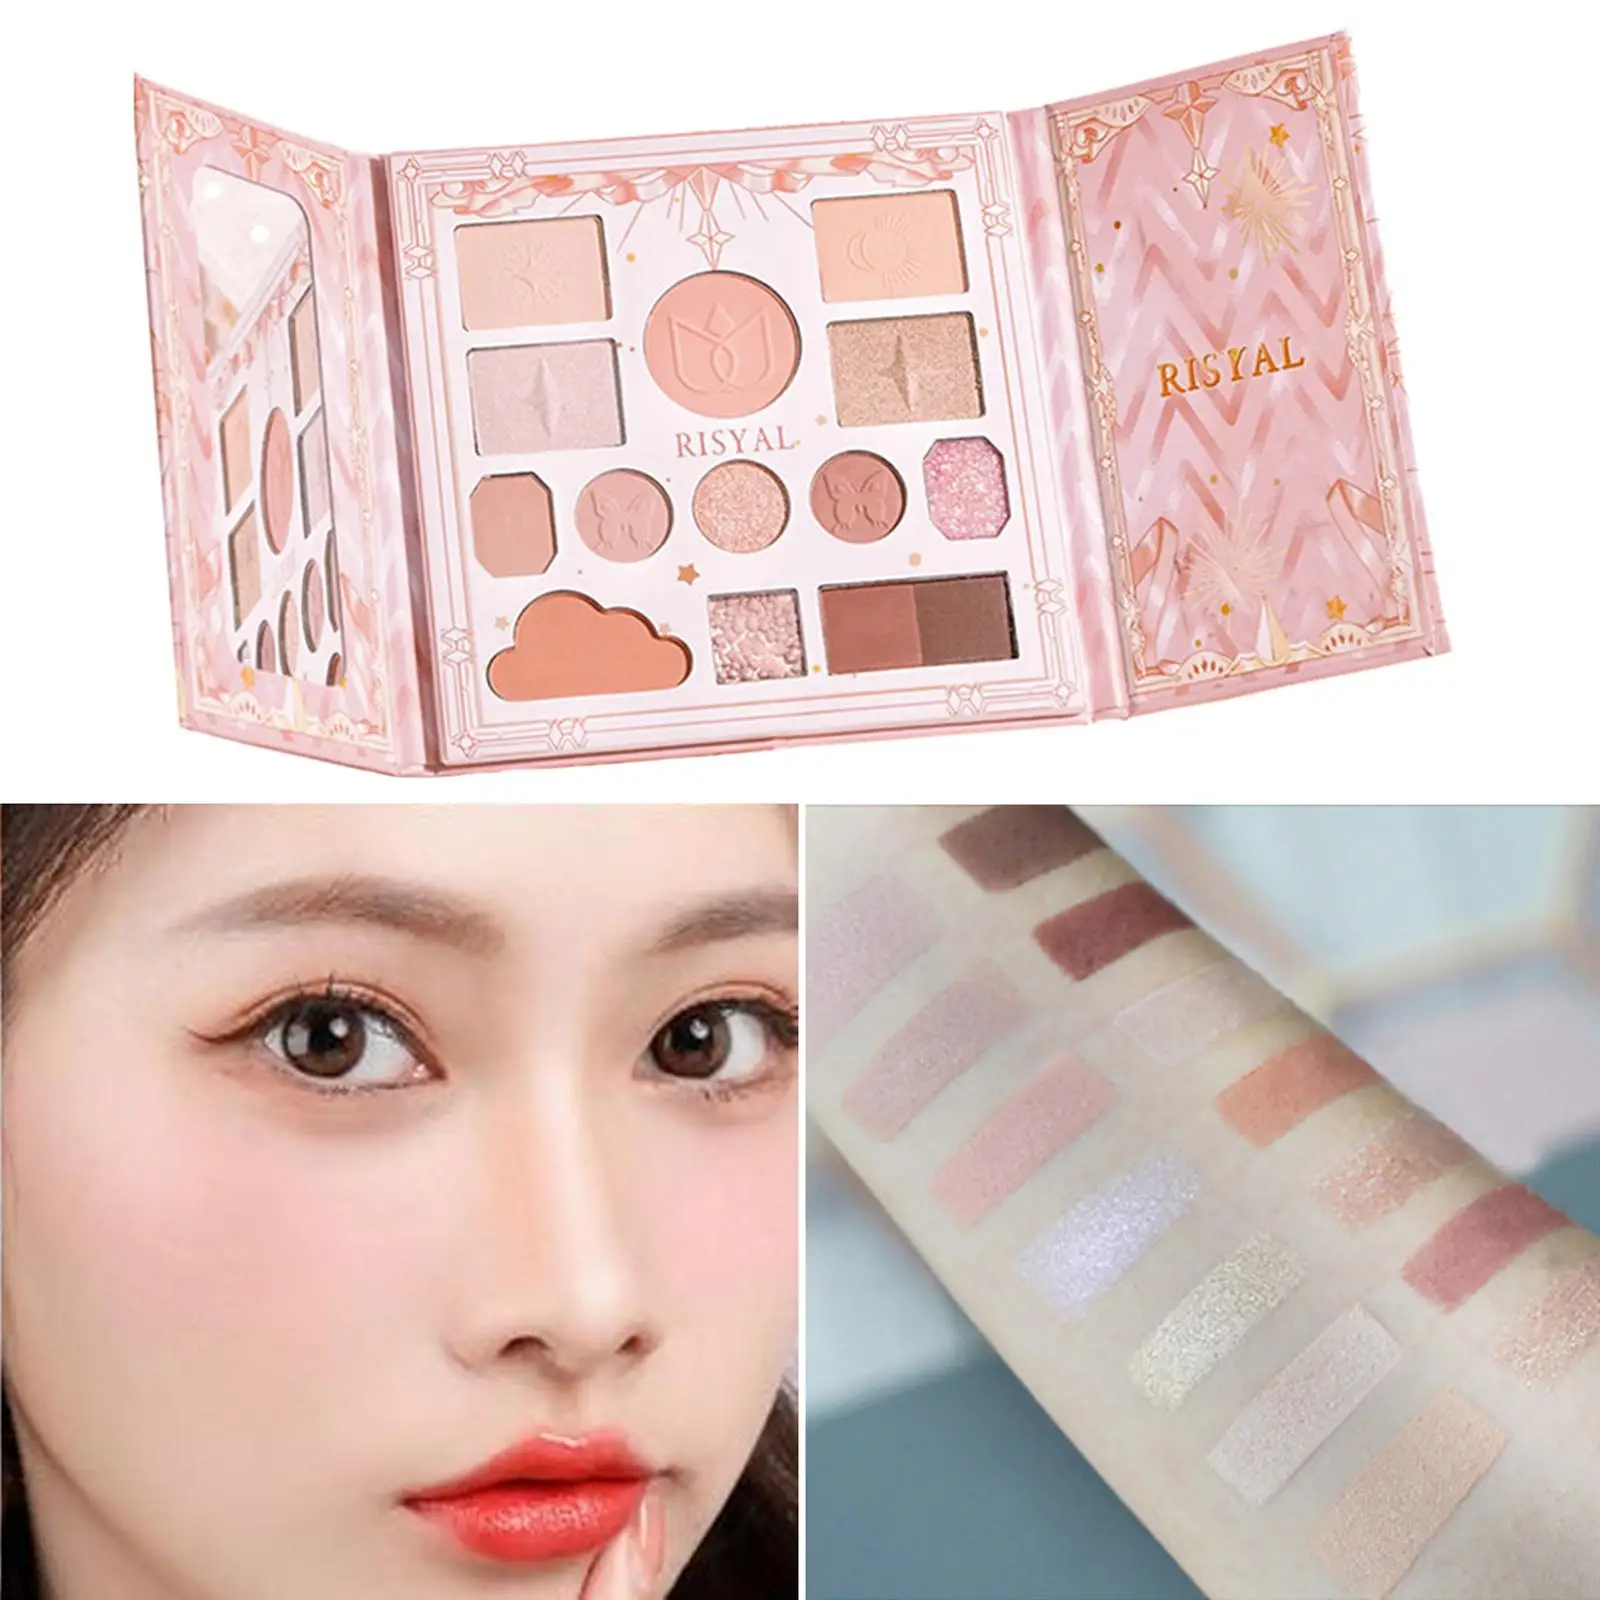 

14 Colors Eyeshadow Palette Natural Nudes Blendable Easy Apply Glitter Powder Eye Shadow Makeup Palette Festival Gift